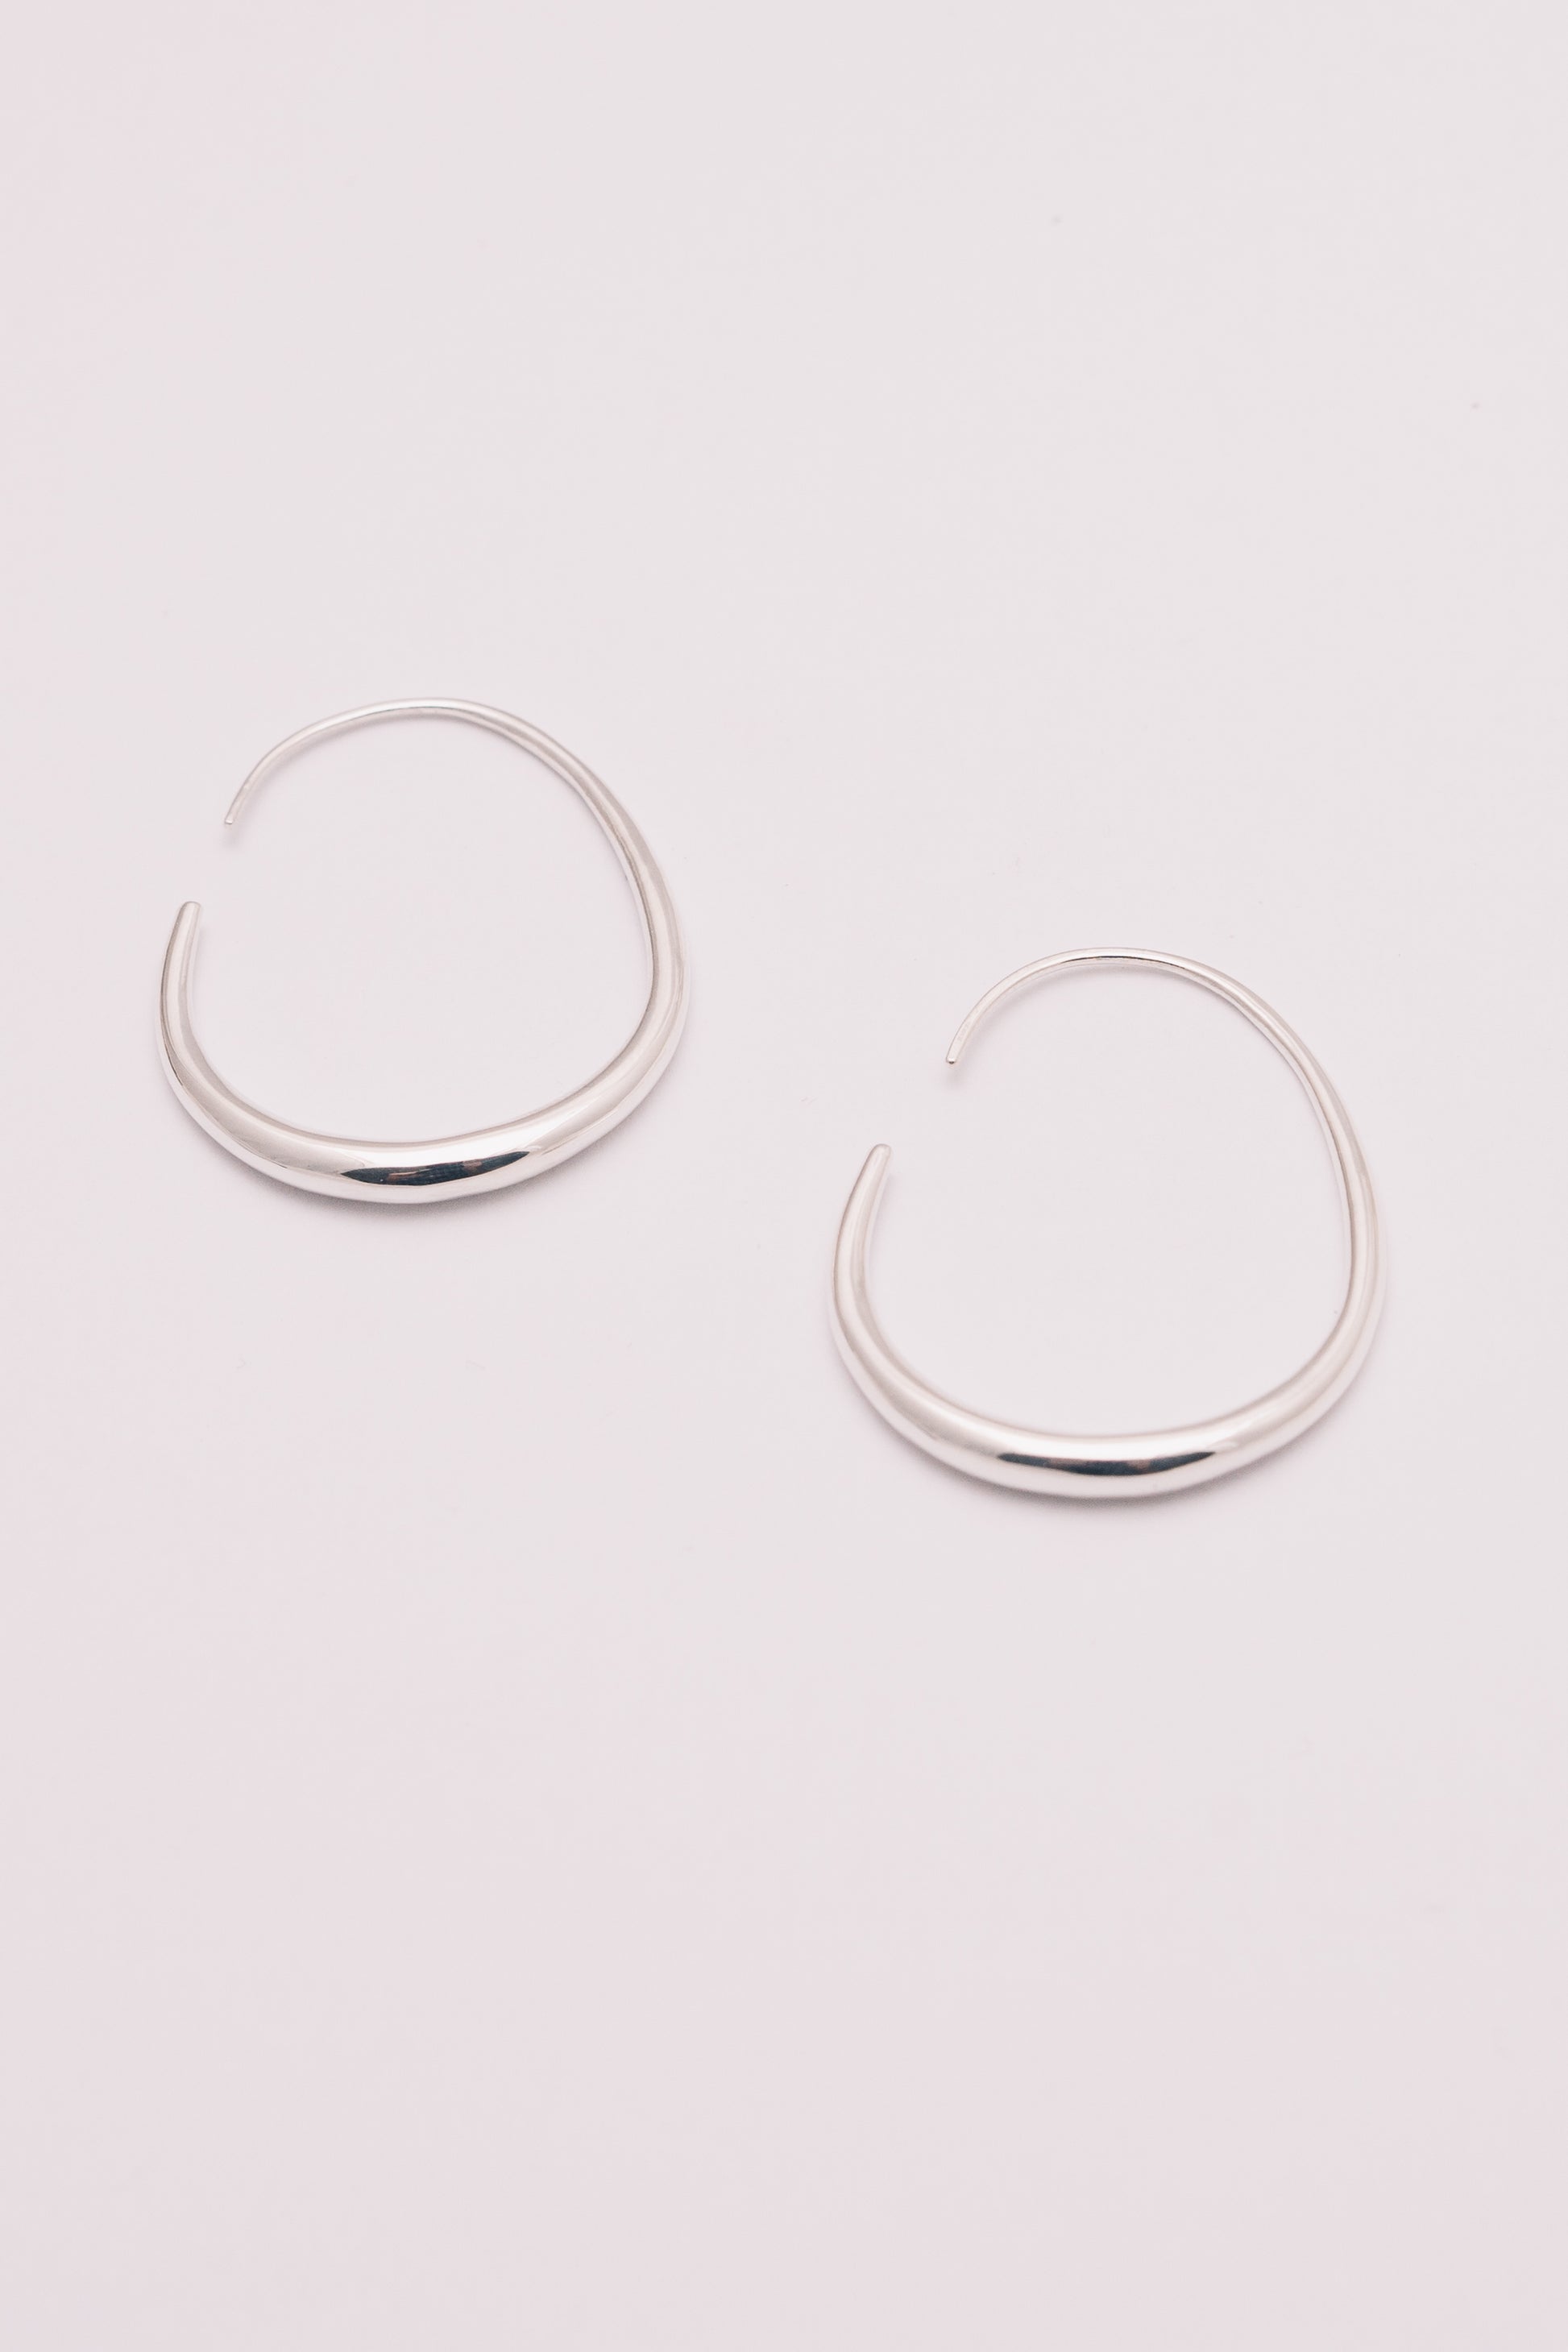 silver threader hoop earrings on white background view from below